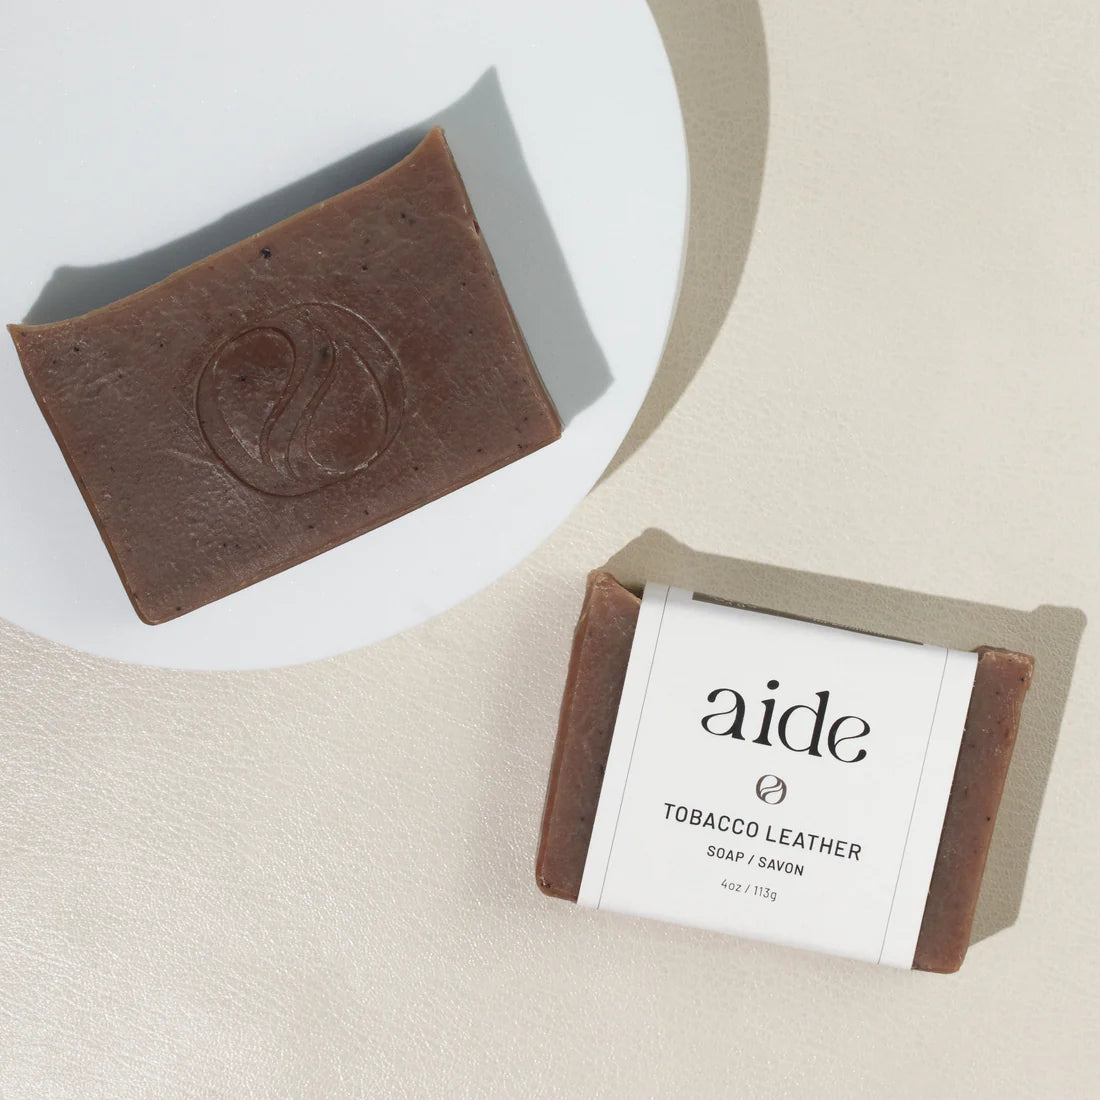 Two bars of reddish-brown soap, one on a white plate, while the other has a white band label